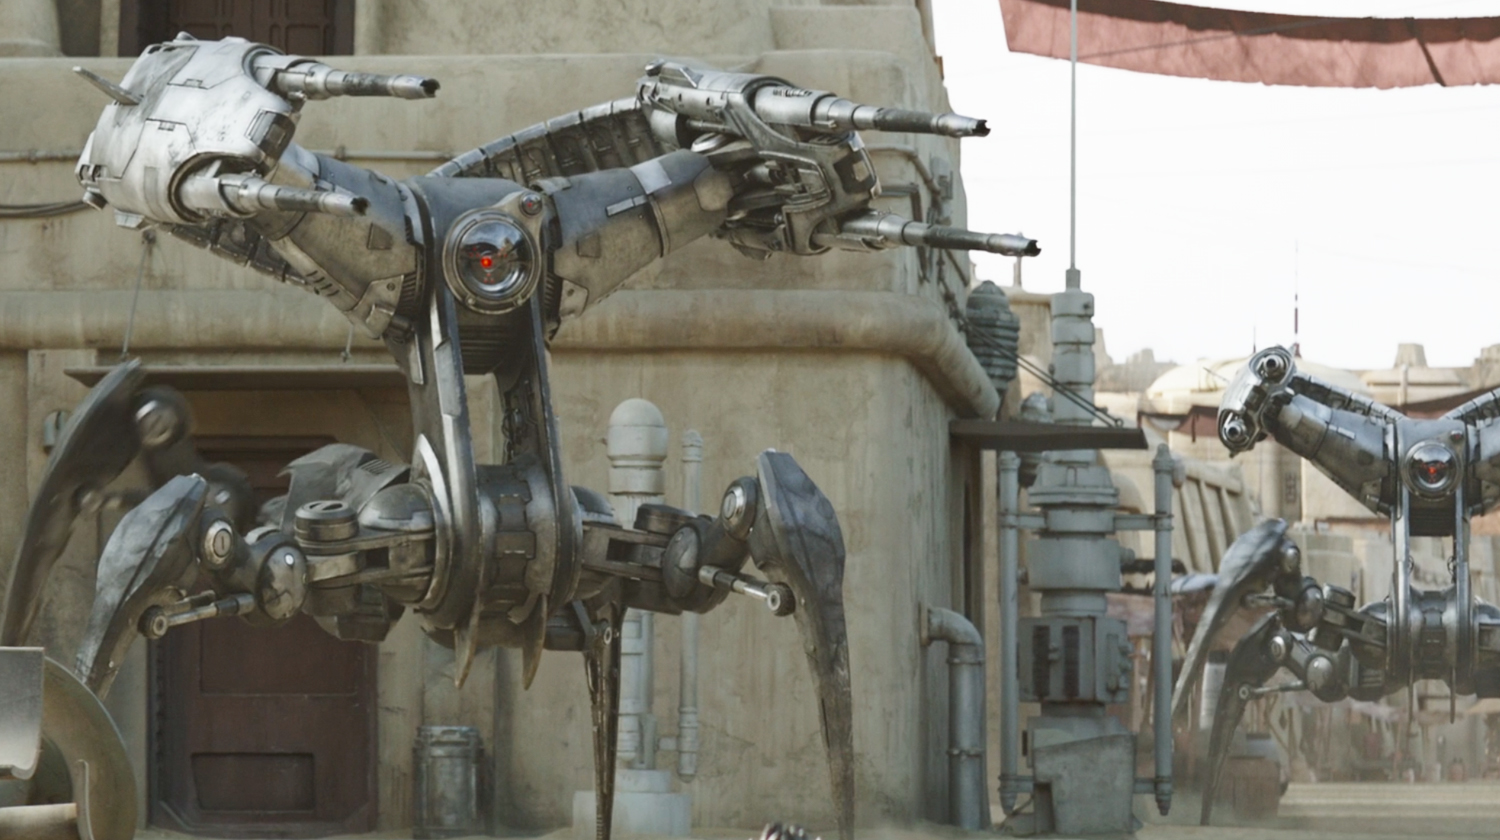 Scorpenek droids were nice, but maybe it would be nice to see the repurposed imperial technique